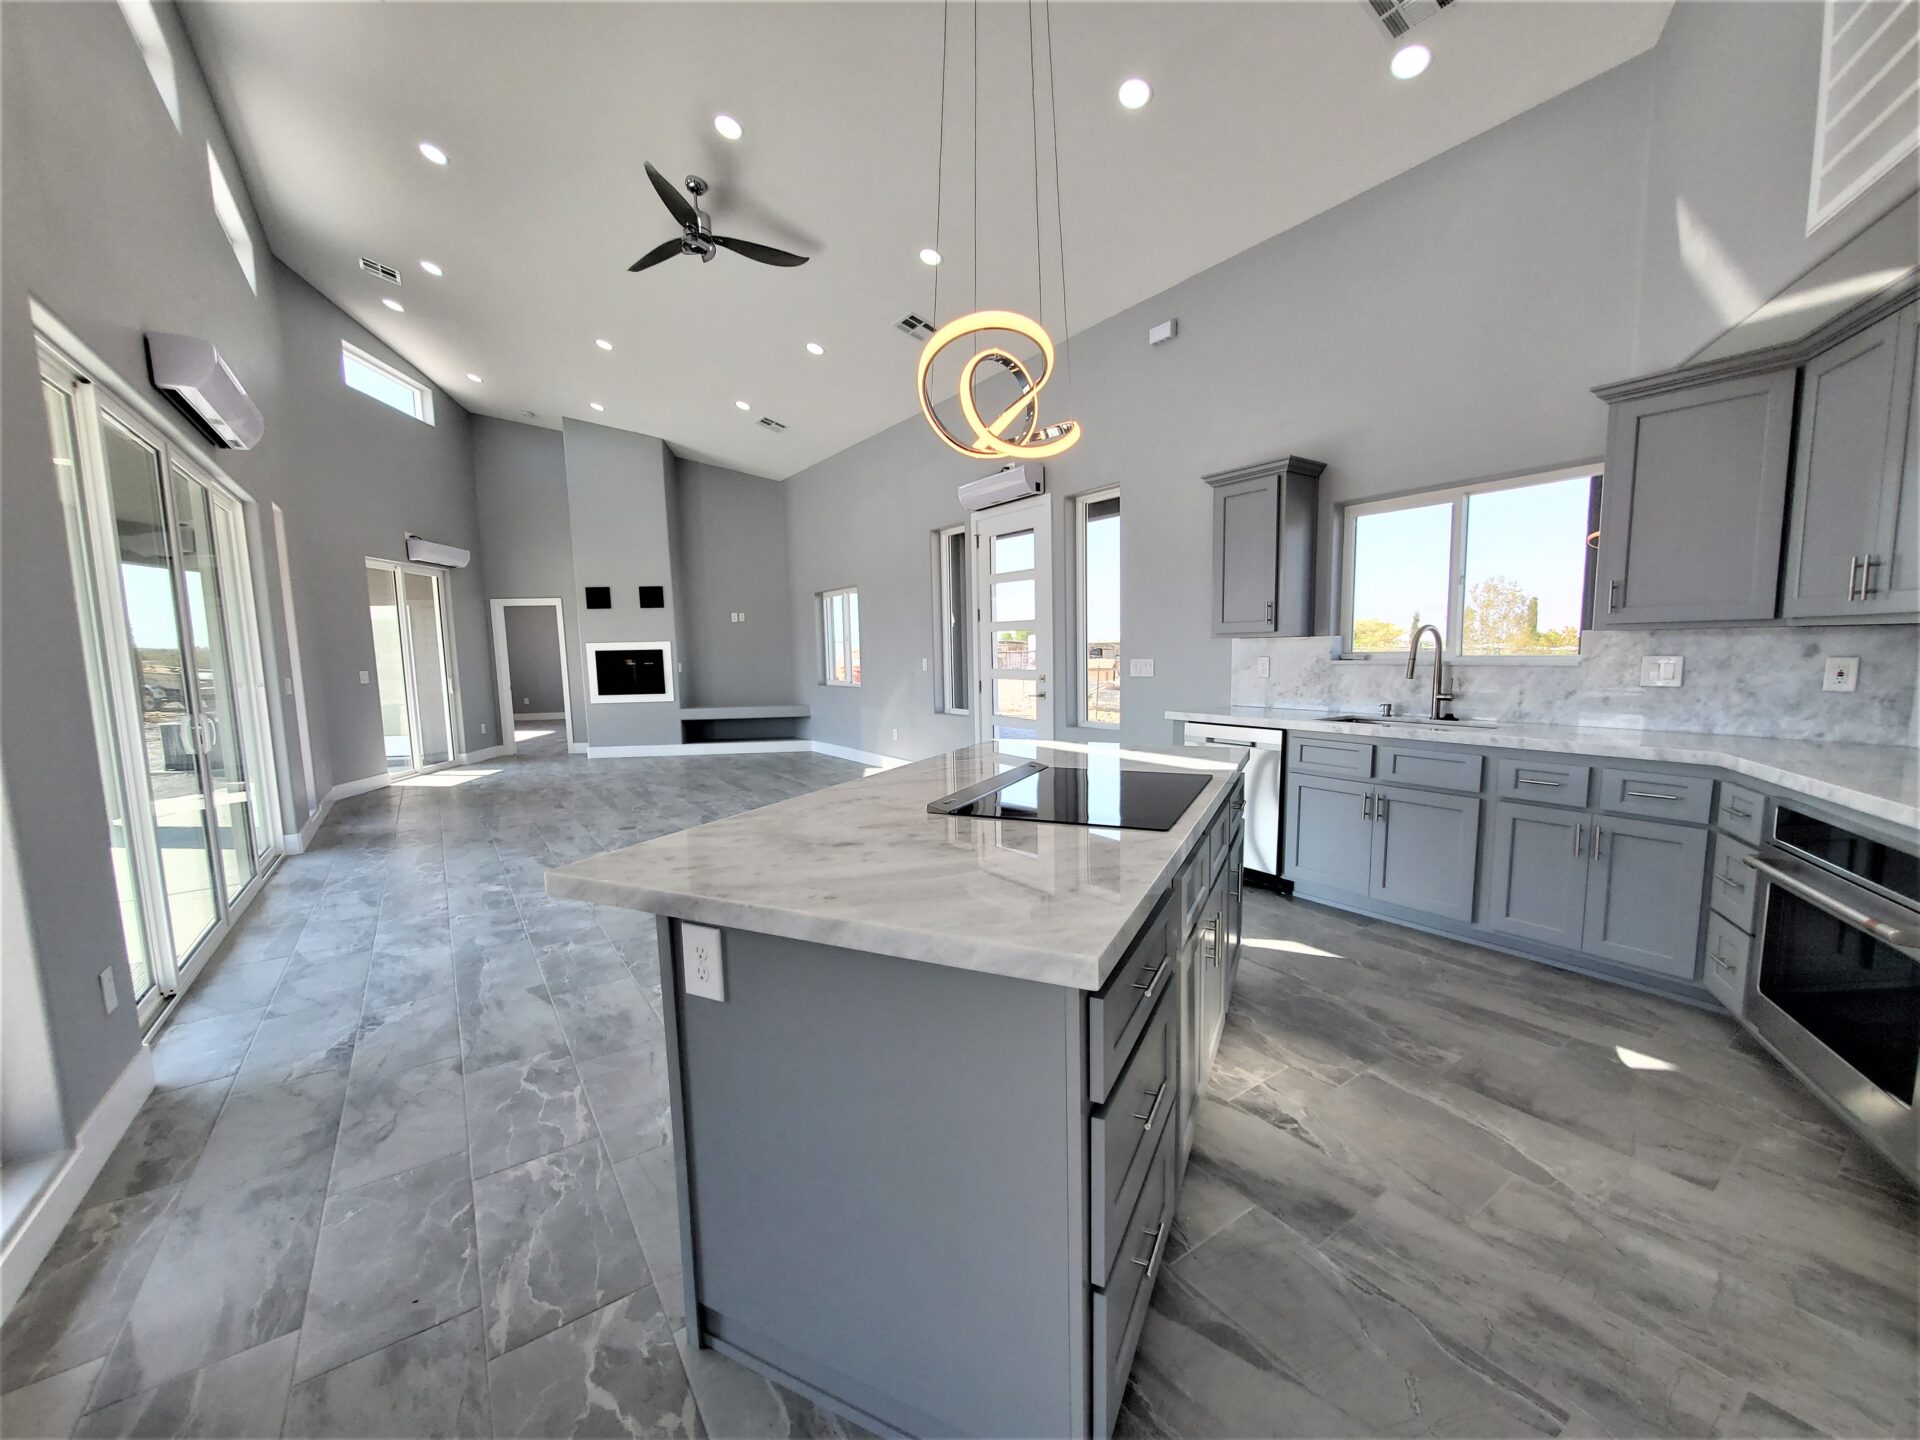 A grey color theme design for the kitchen